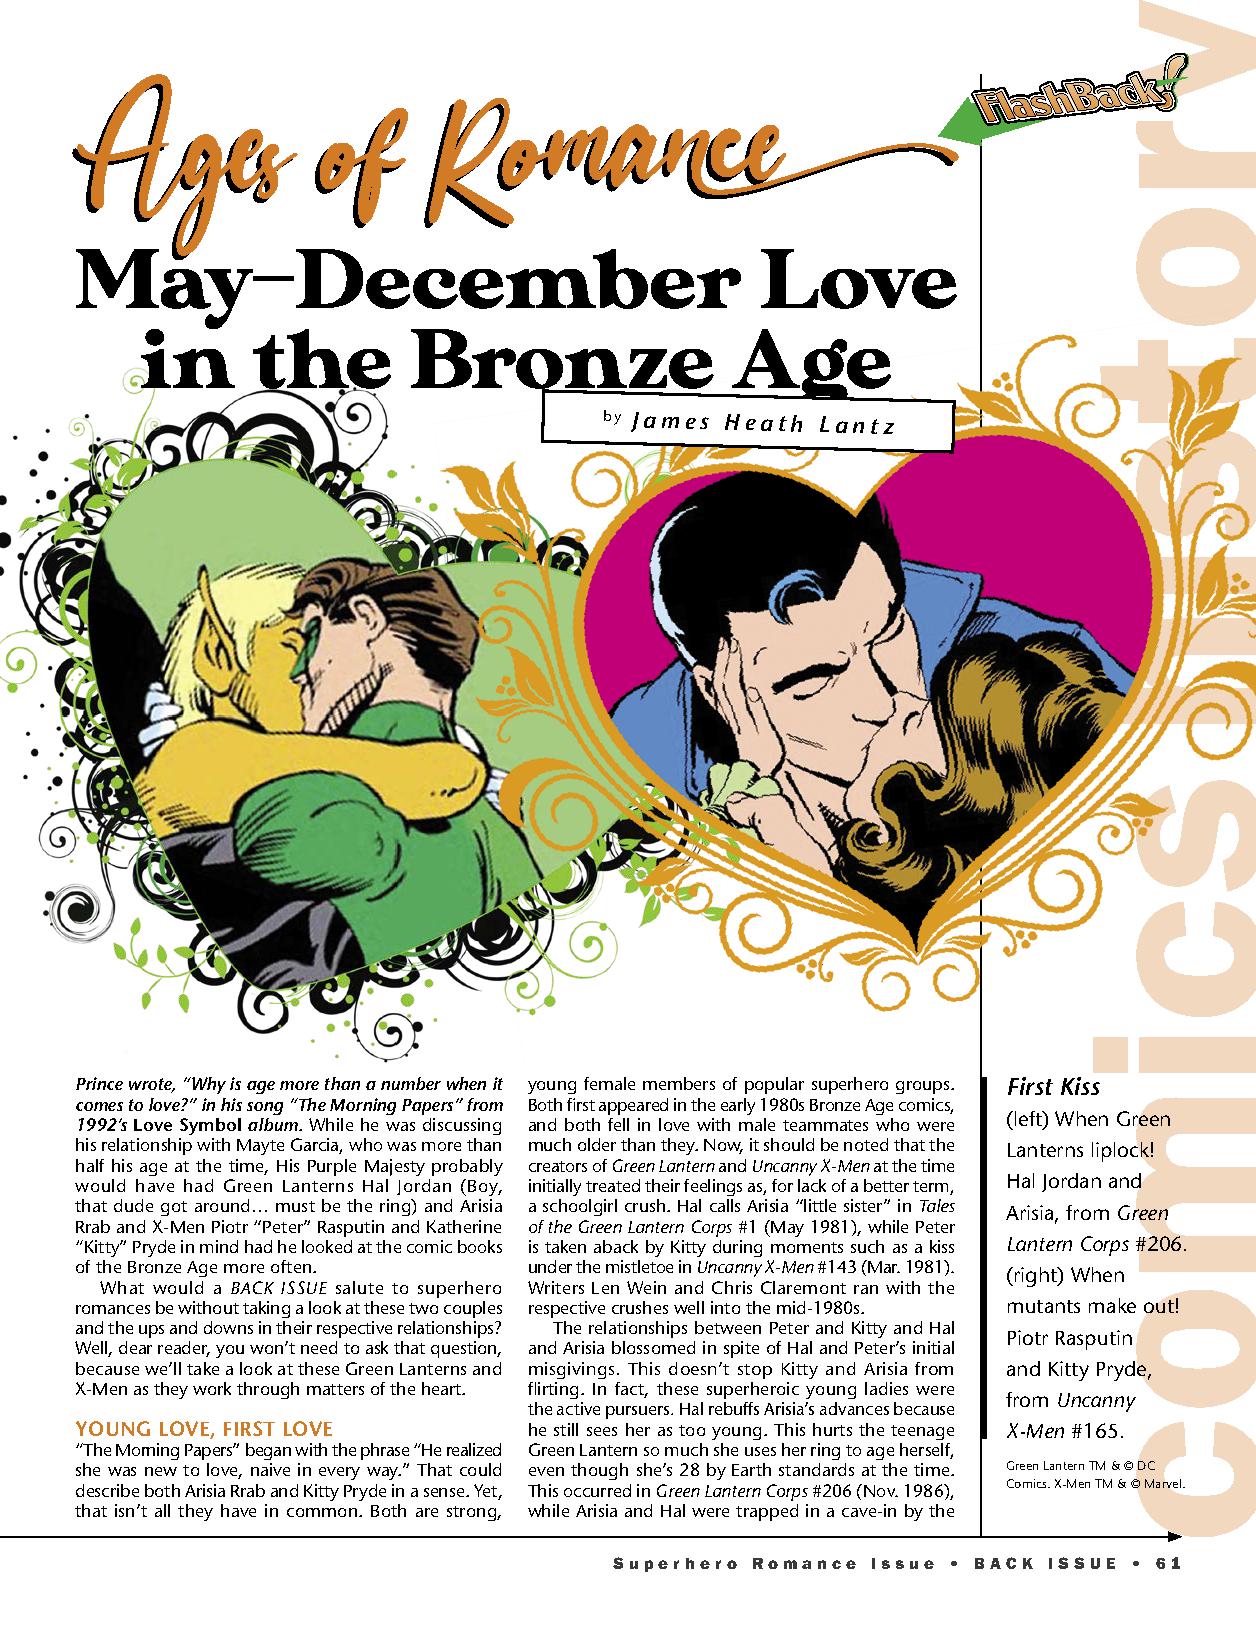 Read online Back Issue comic -  Issue #123 - 63